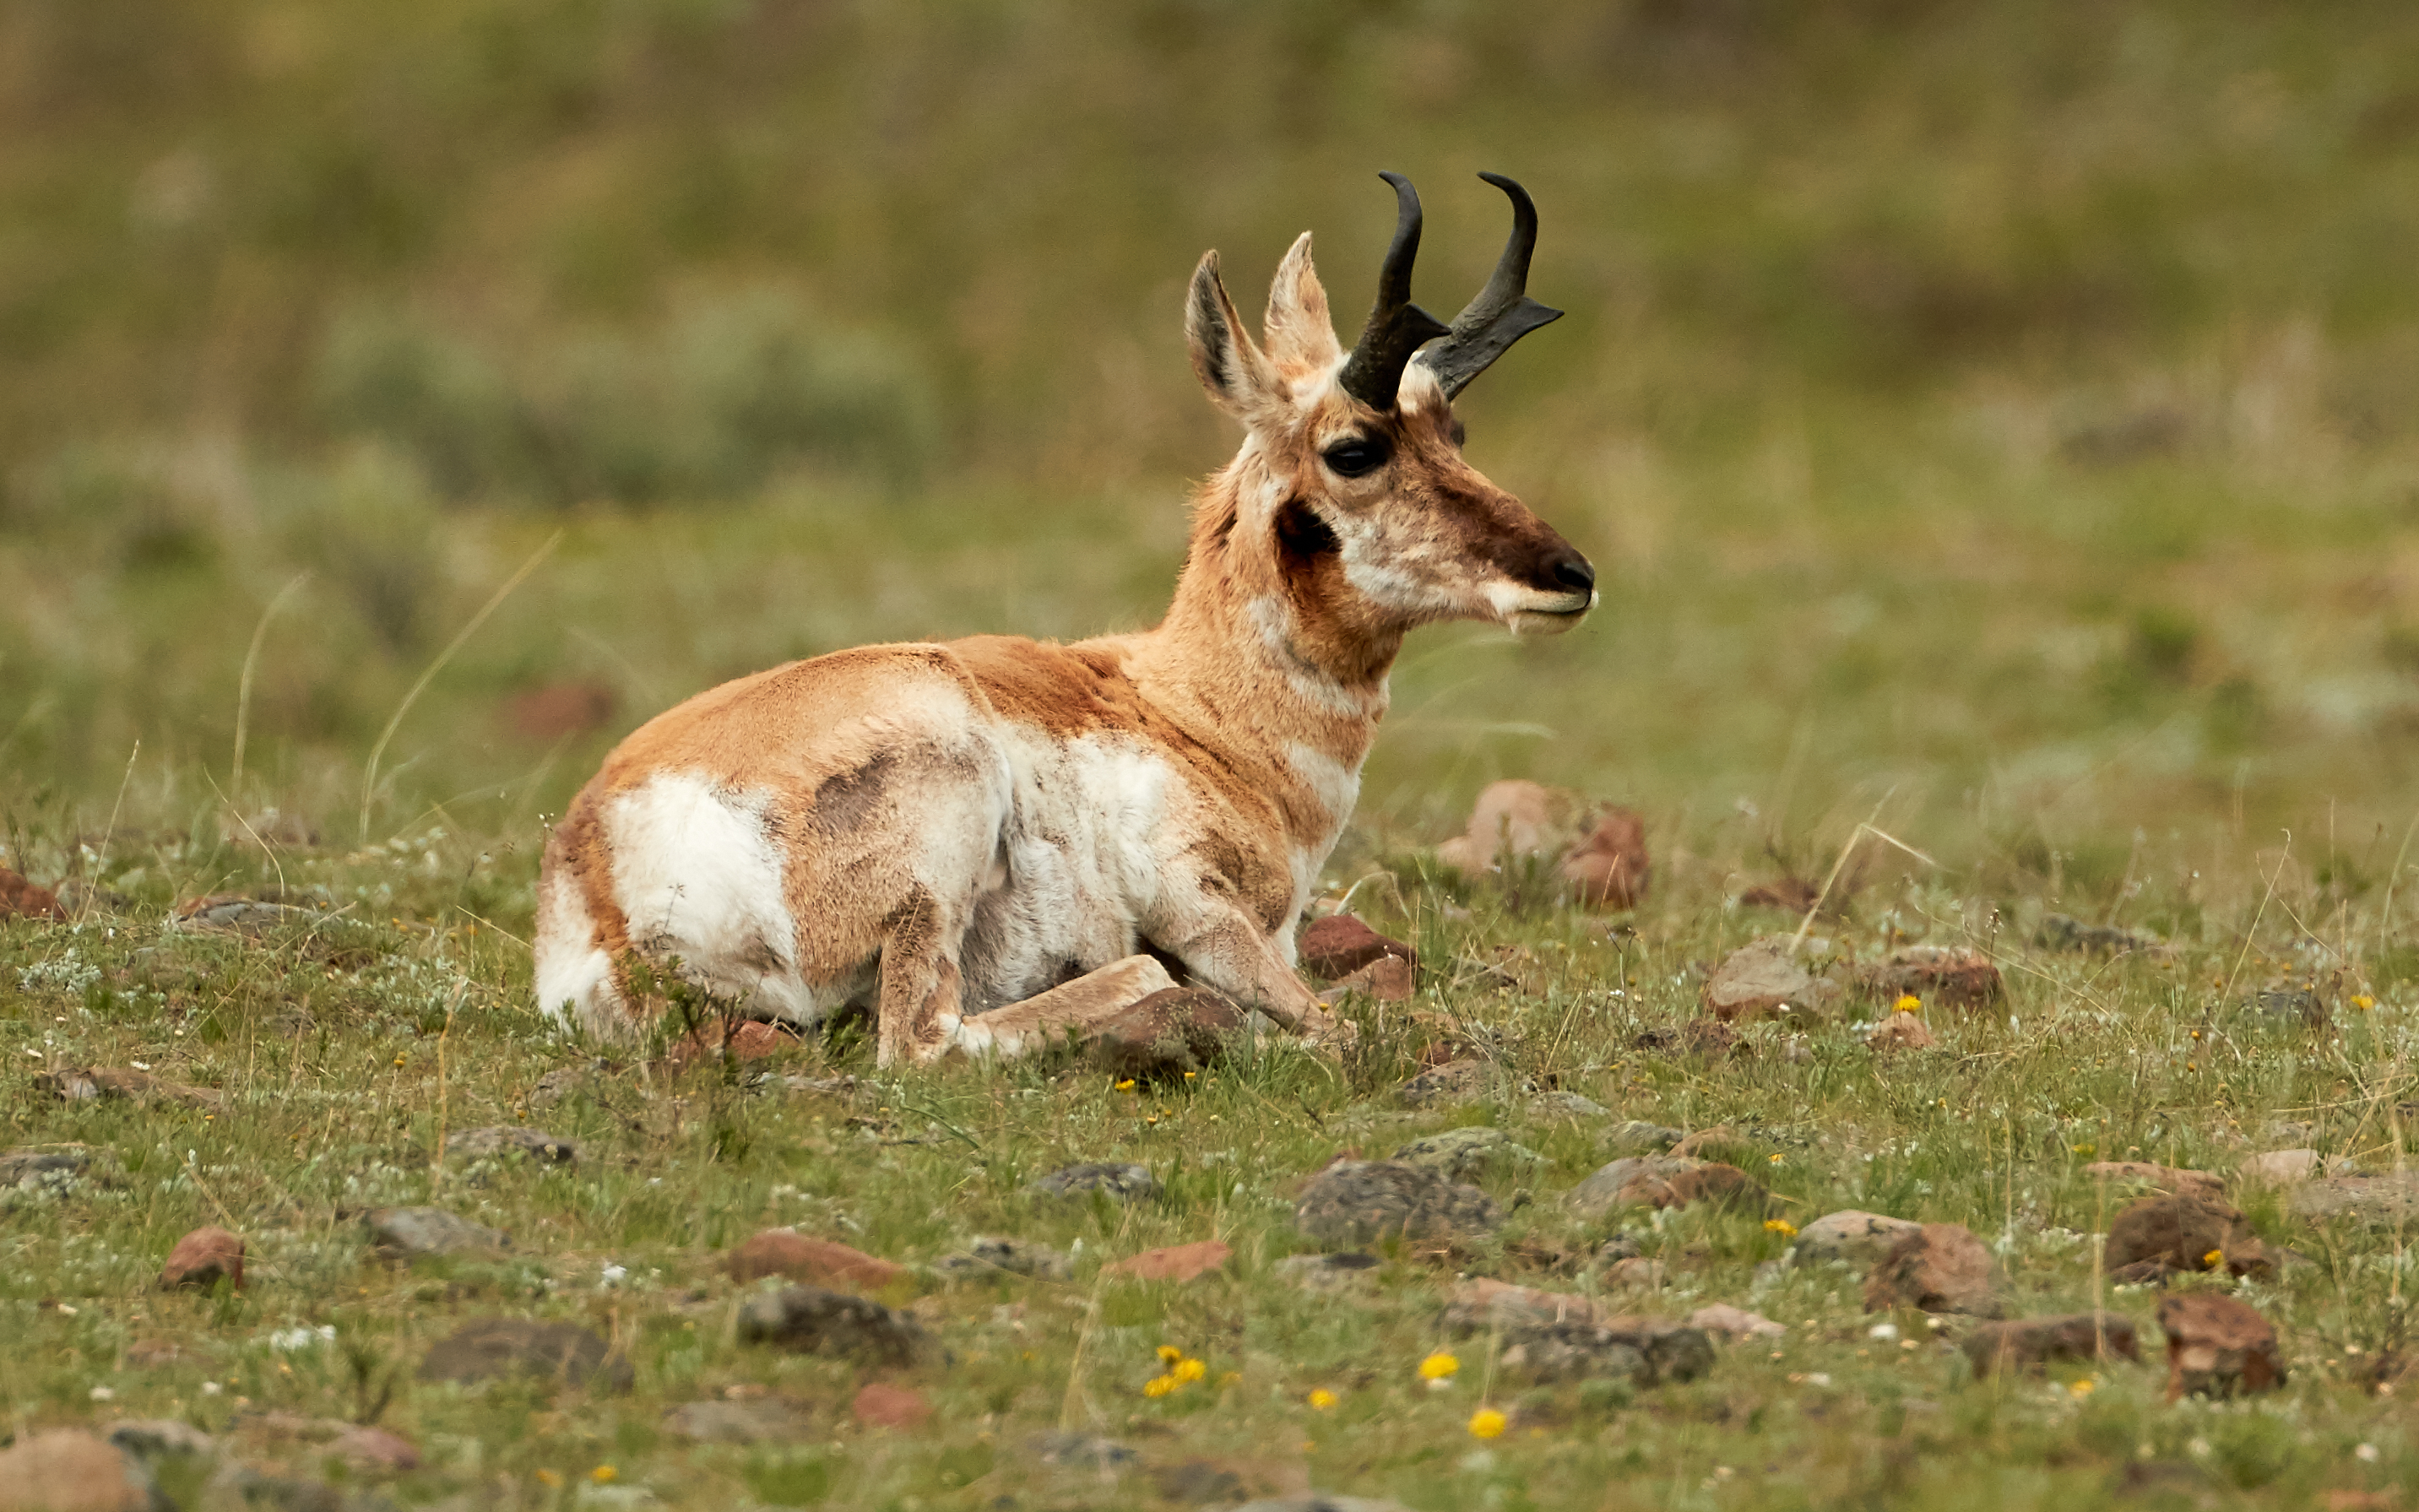 Male pronghorn, resting